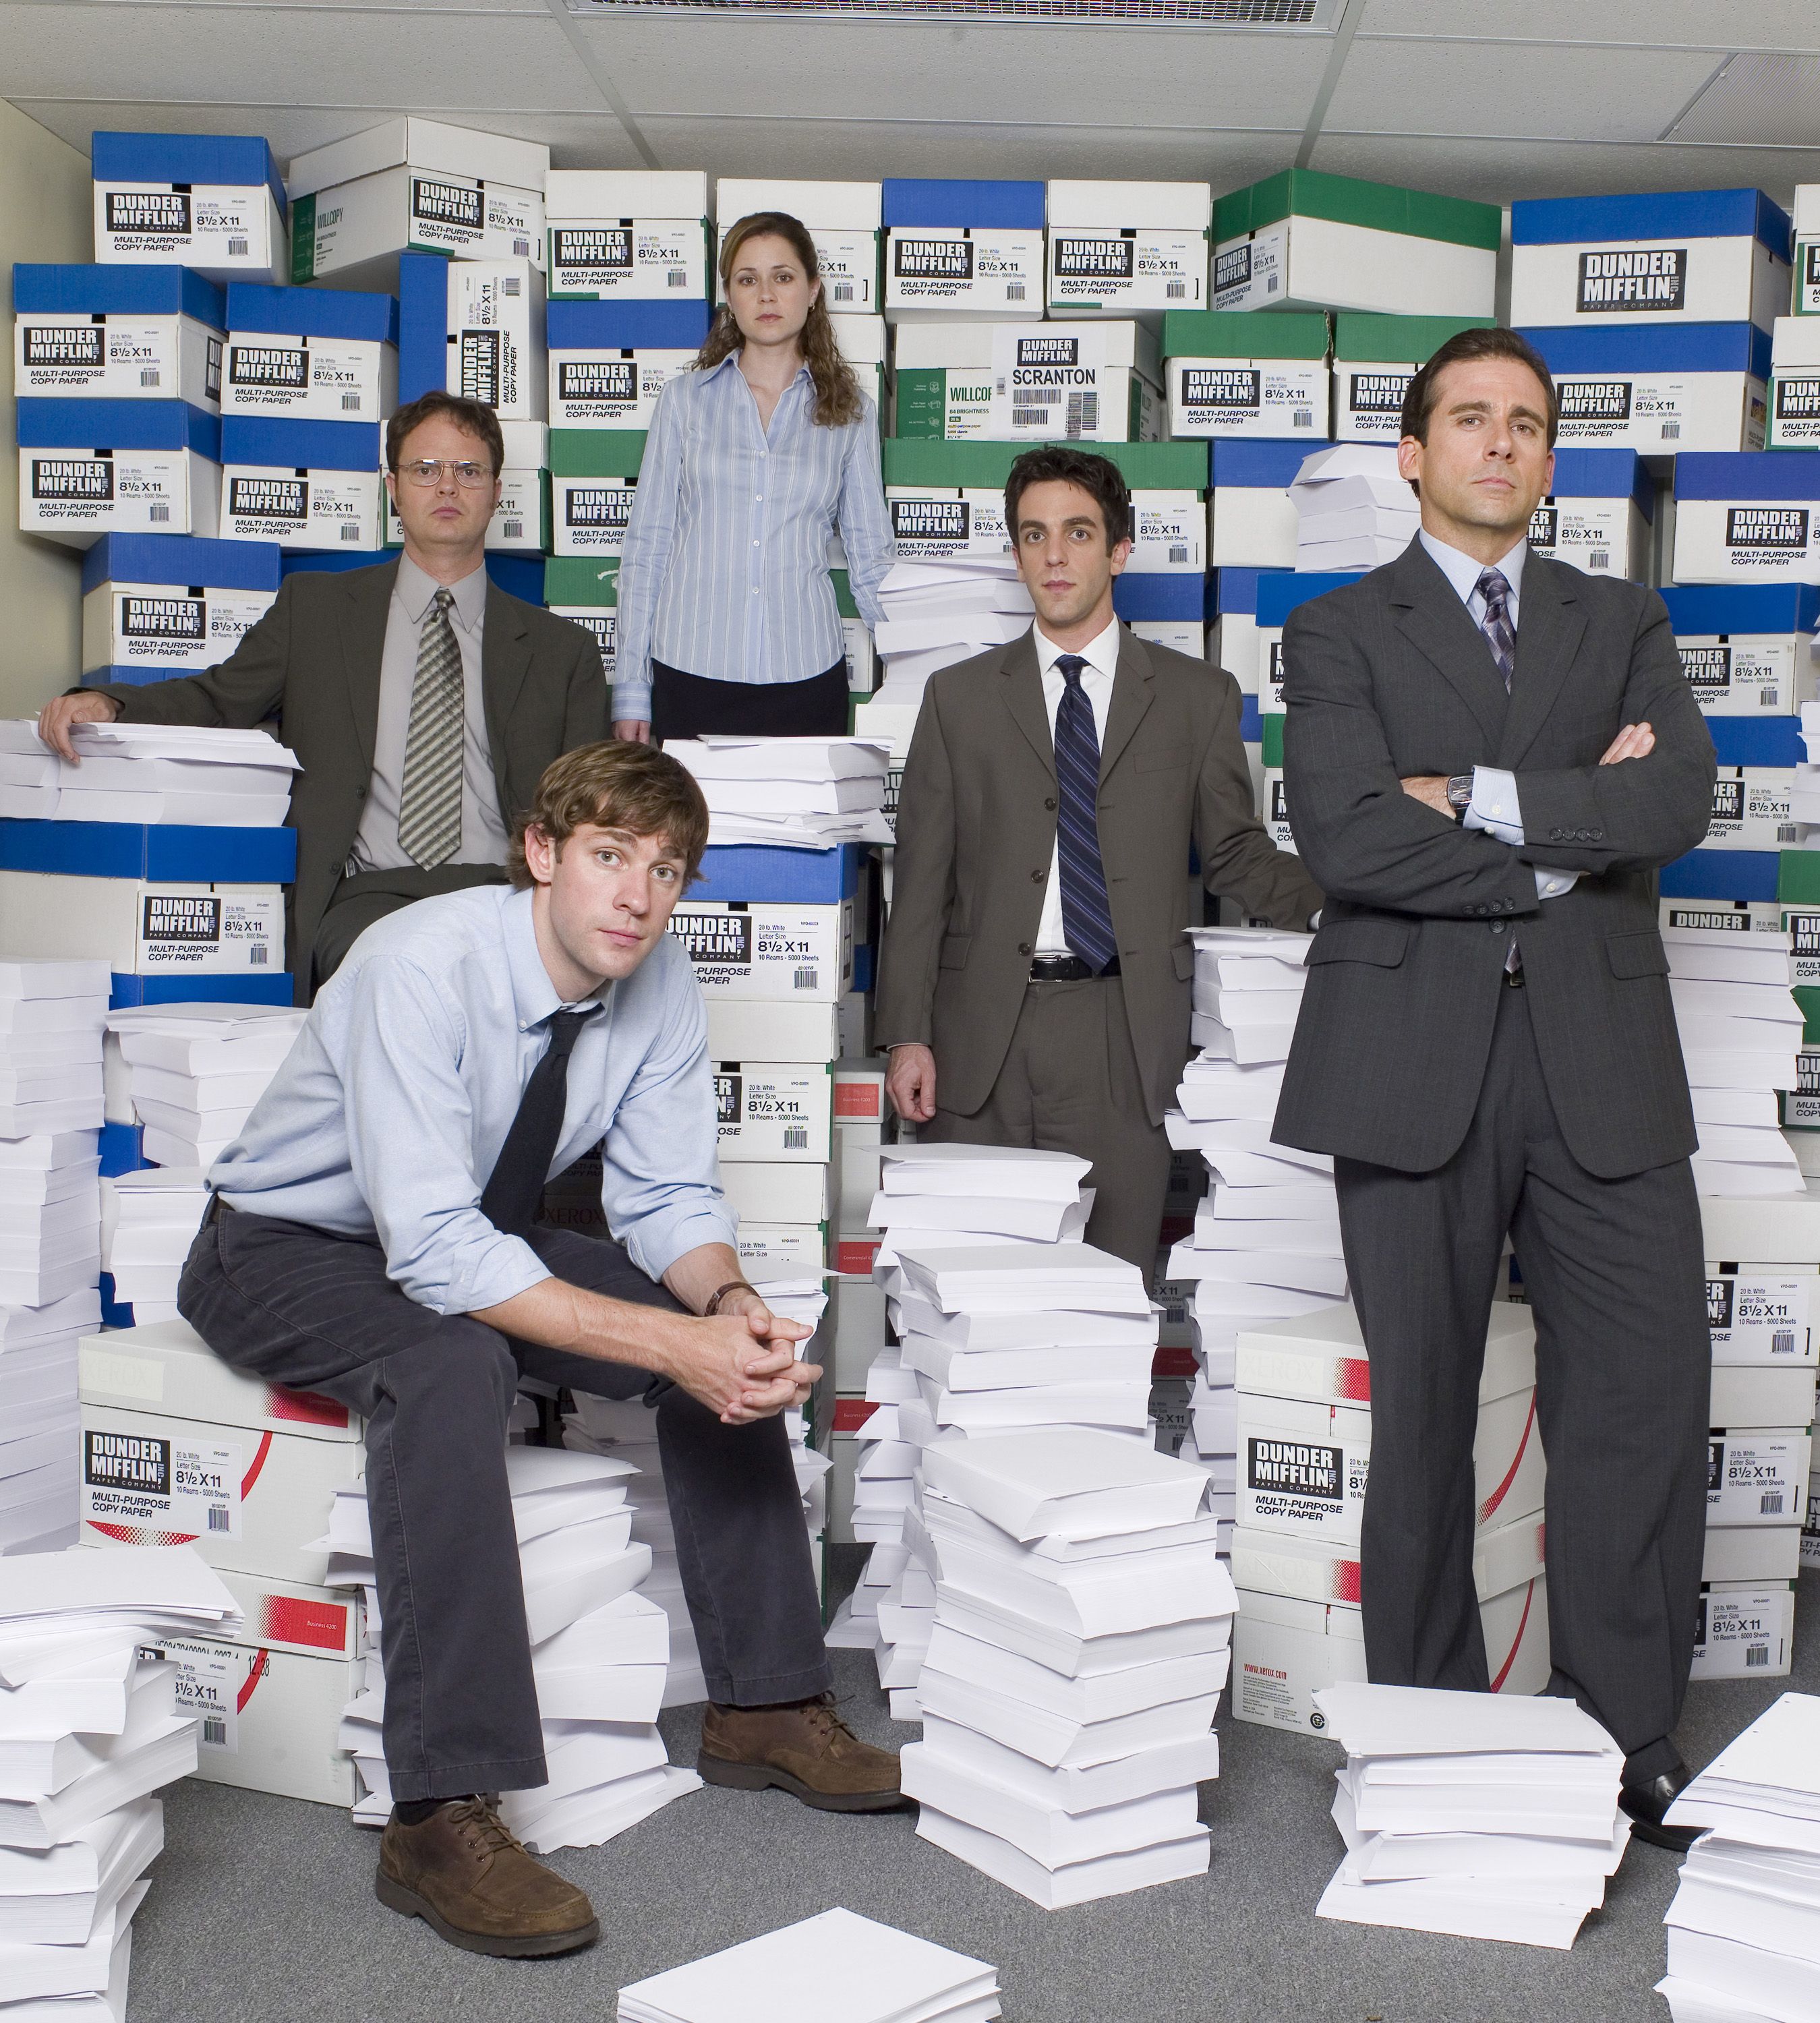 100 The Office Quotes That Will Never Not Be Funny